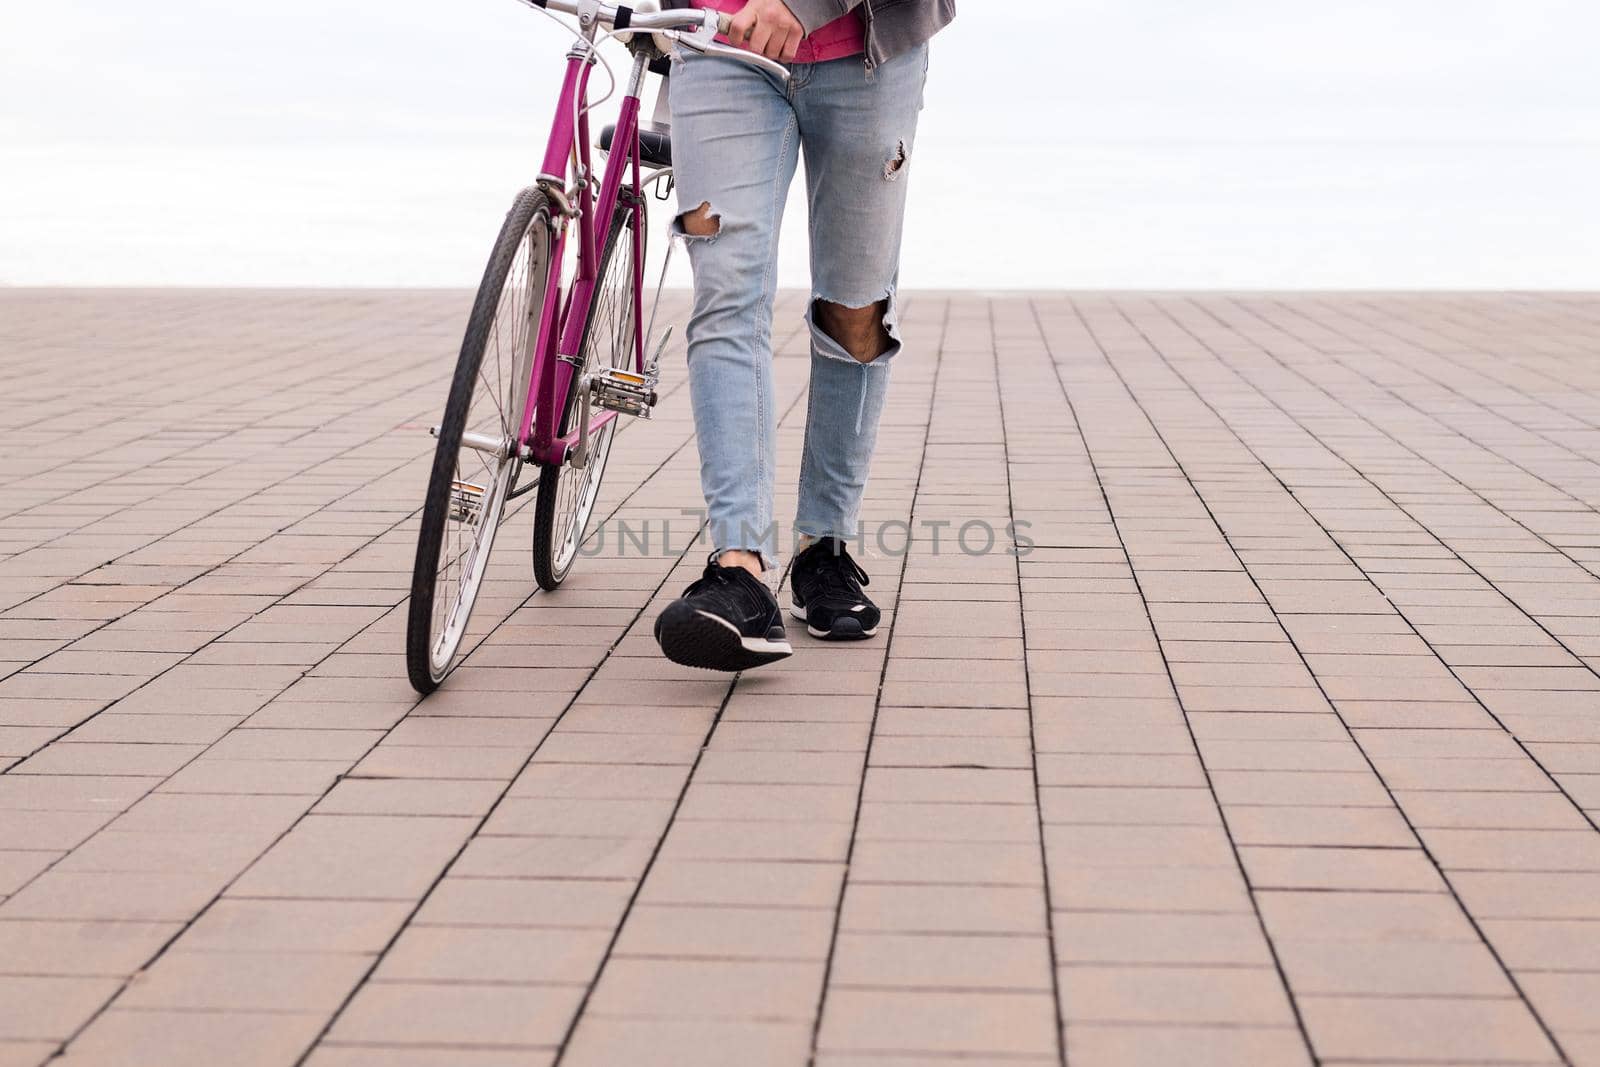 unrecognizable young man walking pushing a bicycle, concept of ecological and sustainable transportation, copy space for text